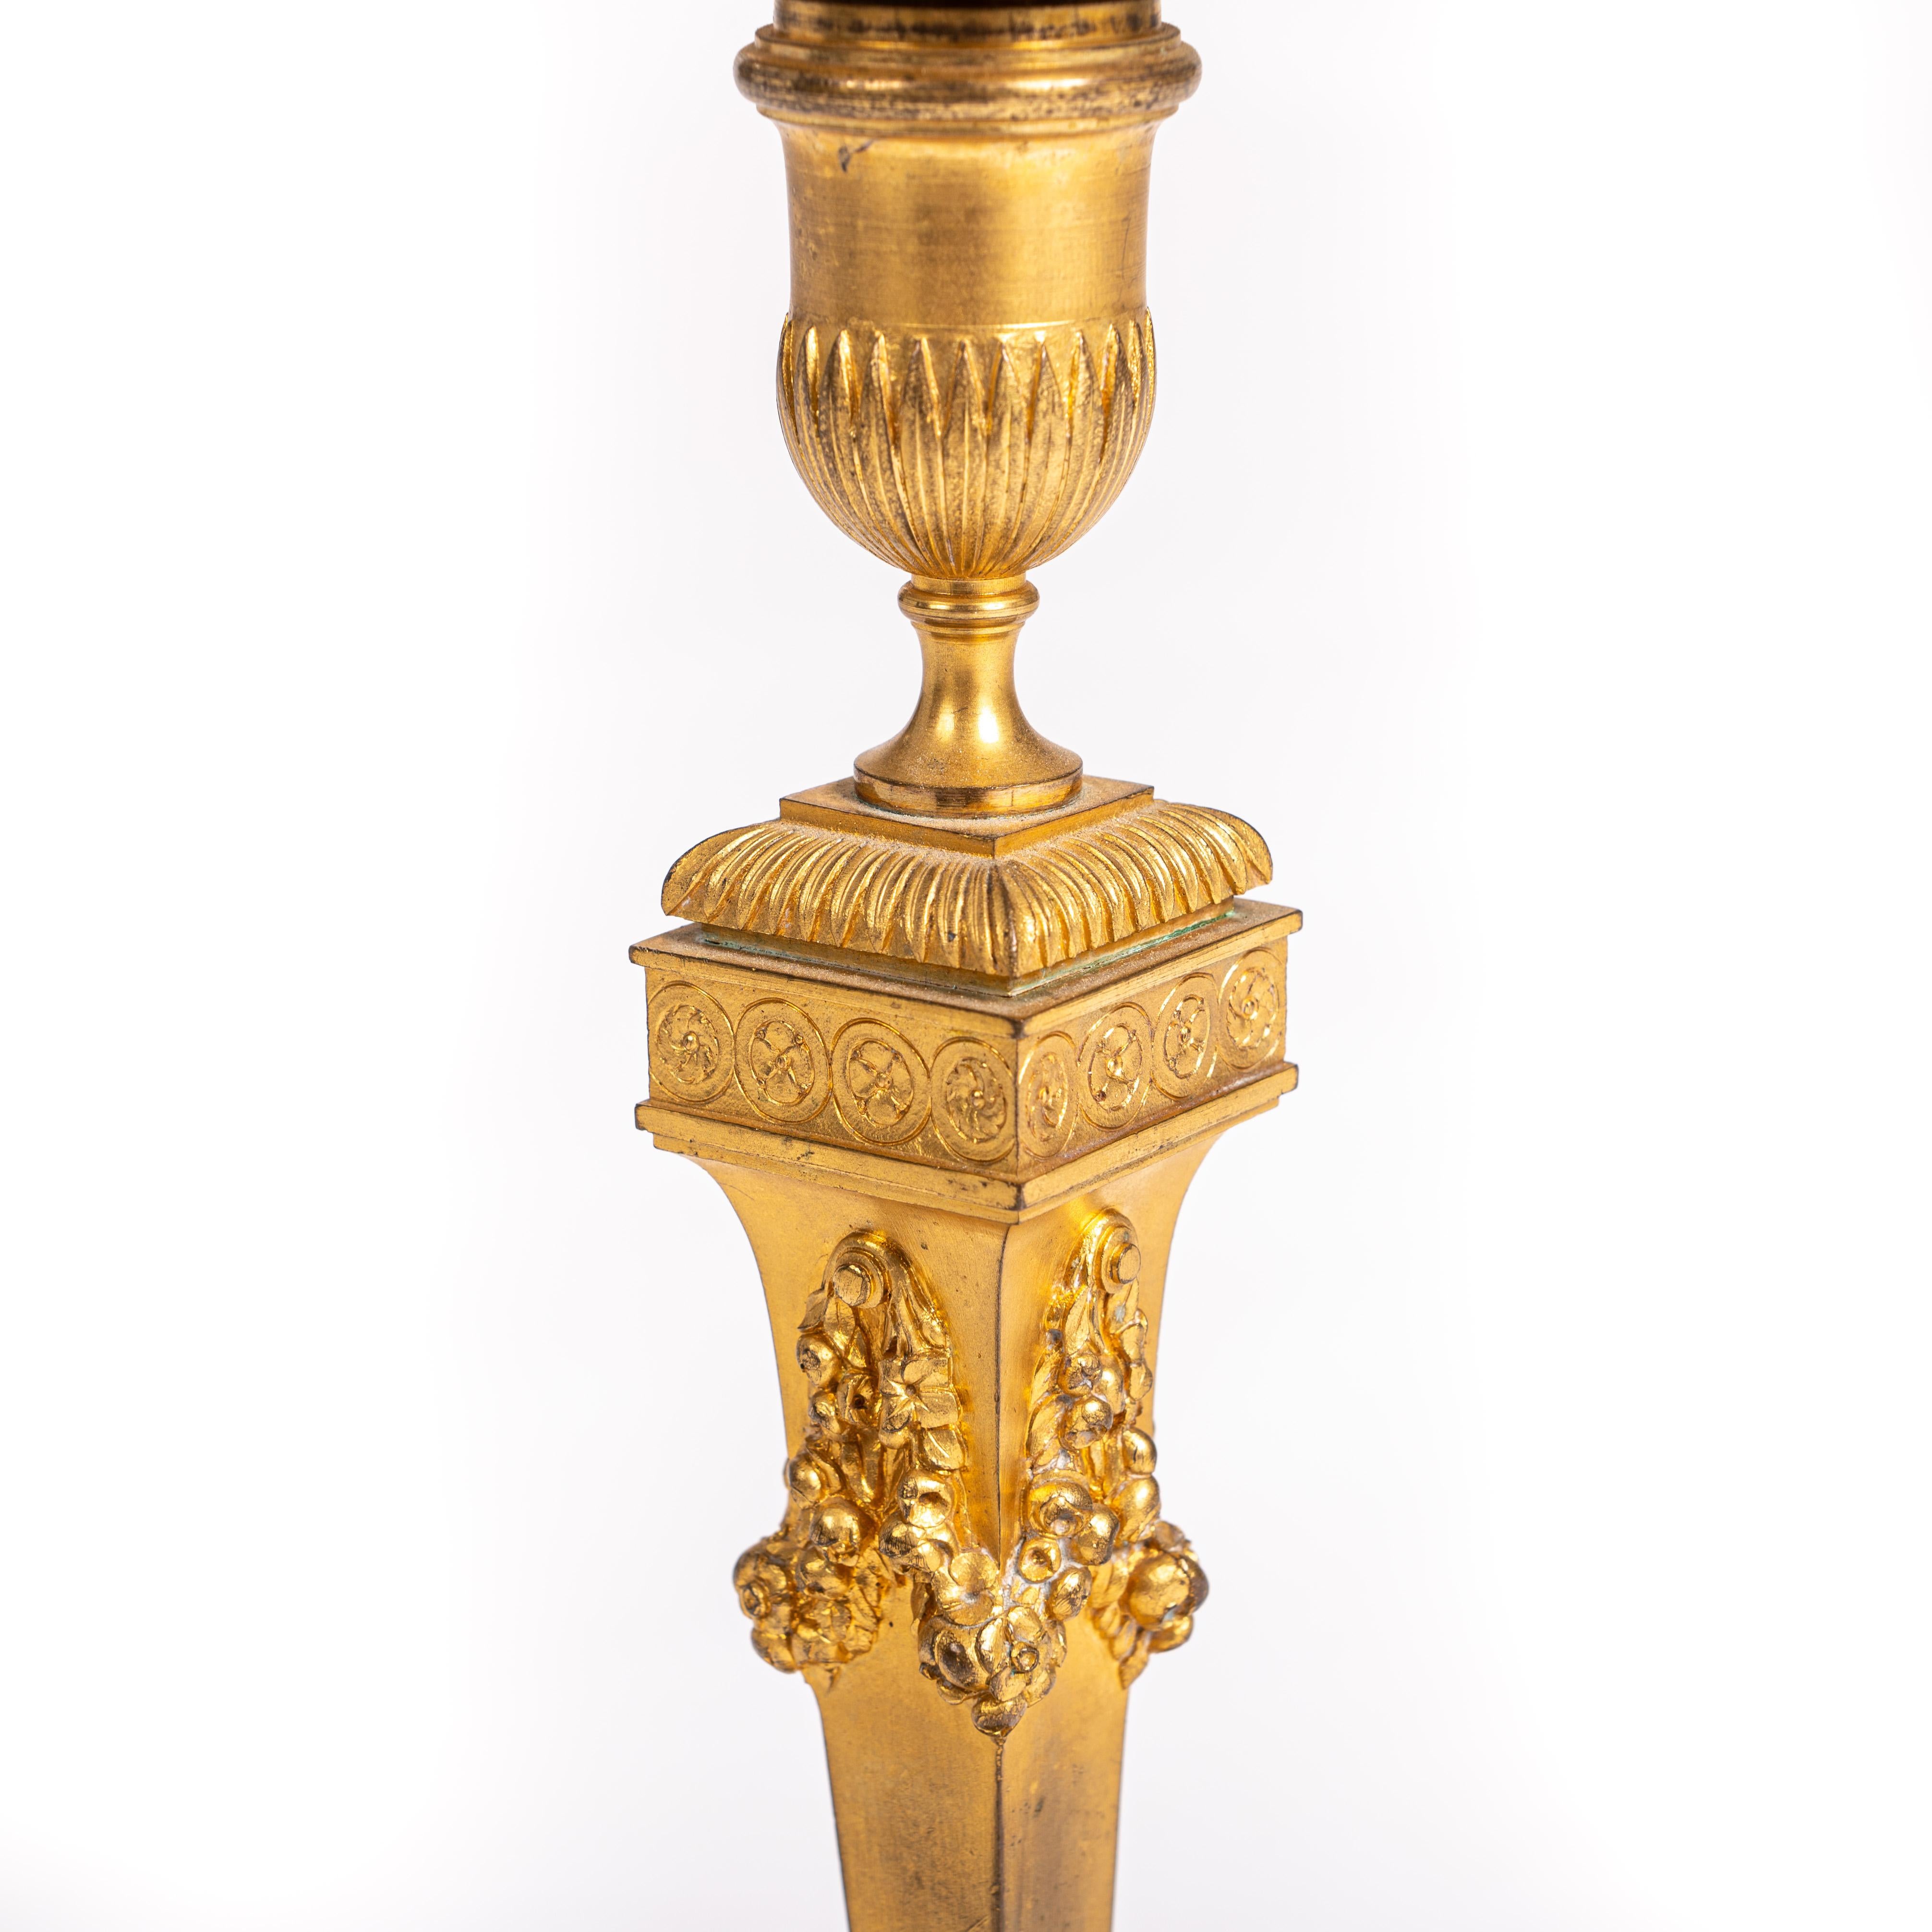 Pair of strict classicistical fire gilded candlesticks France 1840, signed Barbedienne.

Strict classicist design with square base, flowers and leaf ornaments in different finish. Decorated and smooth elements in alternation create otically balanced